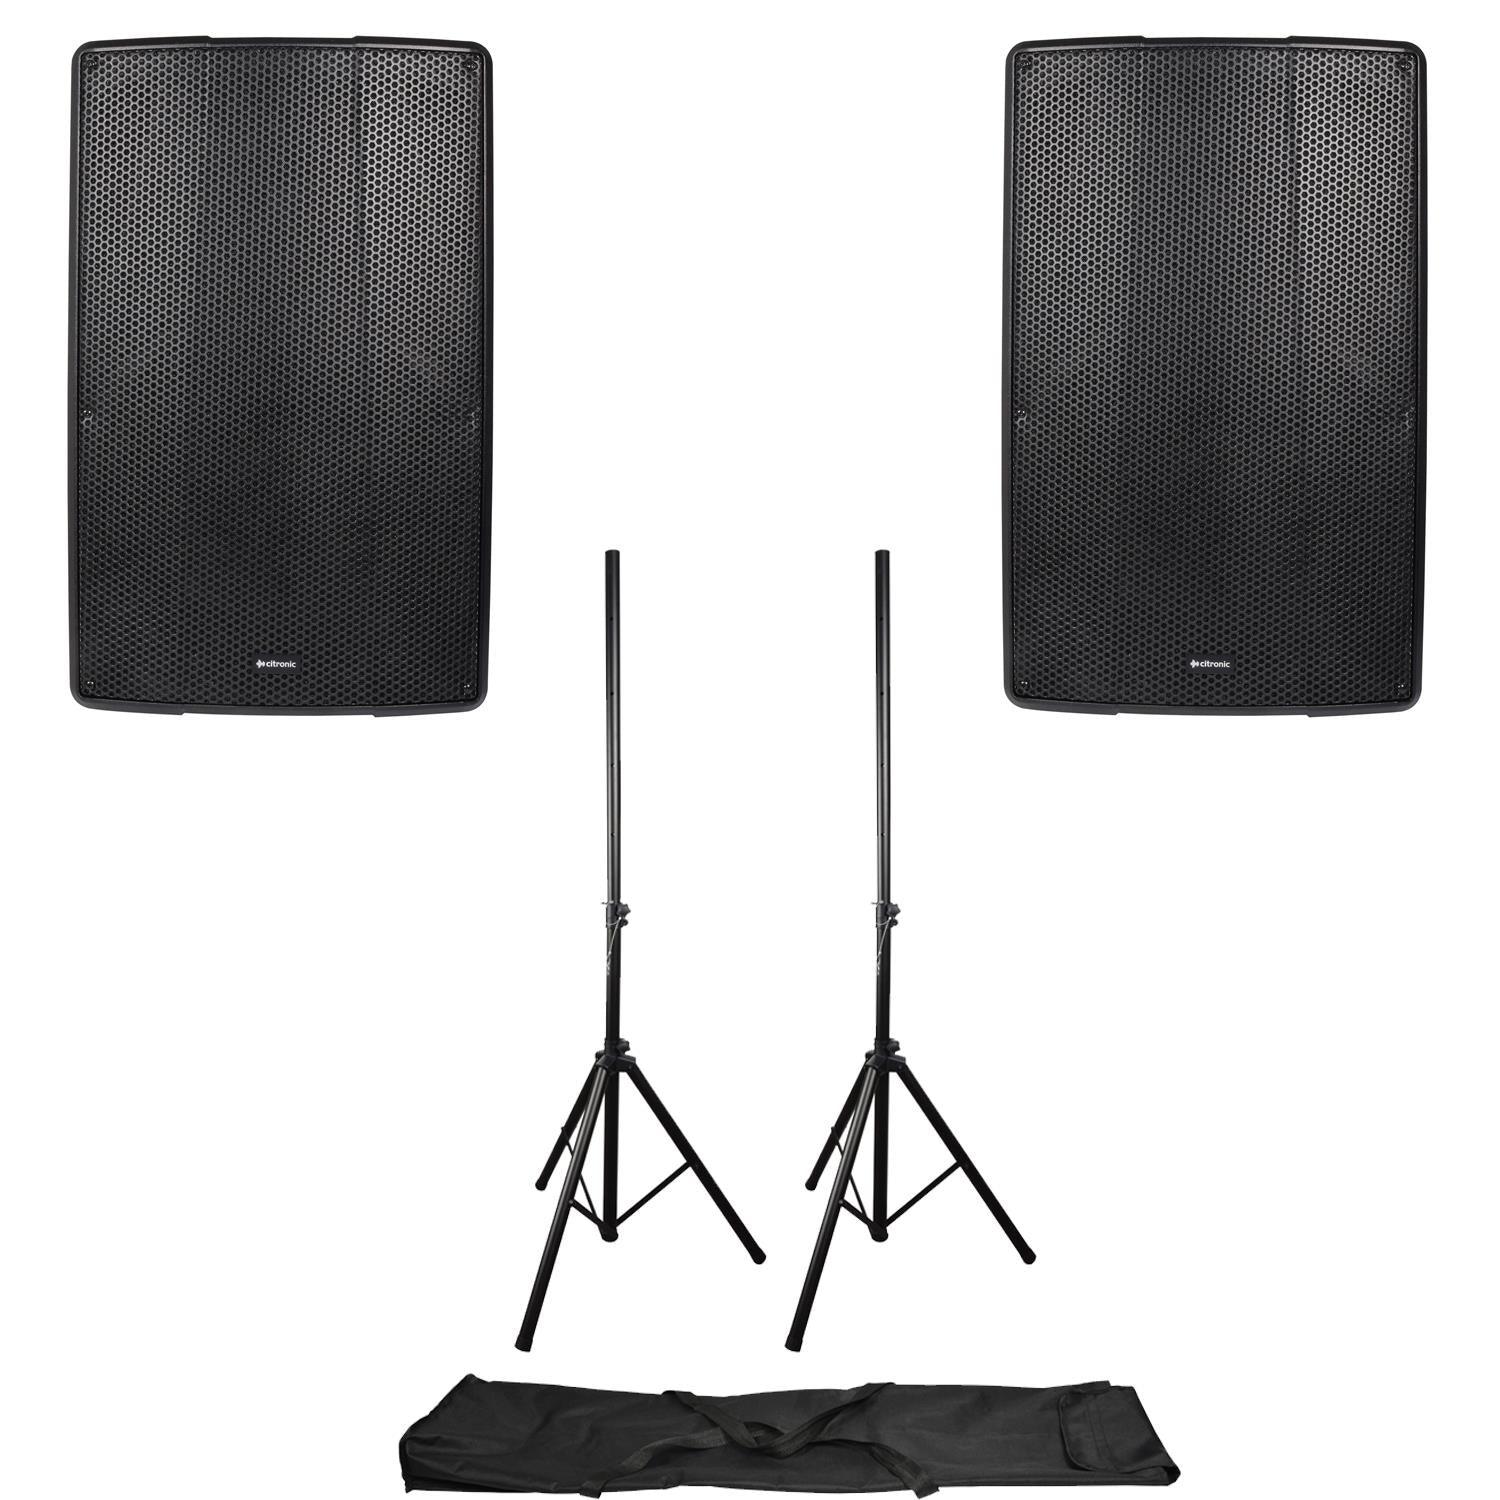 2 x Citronic CLARA-12A 12" 800w Active Speaker with Stands - DY Pro Audio